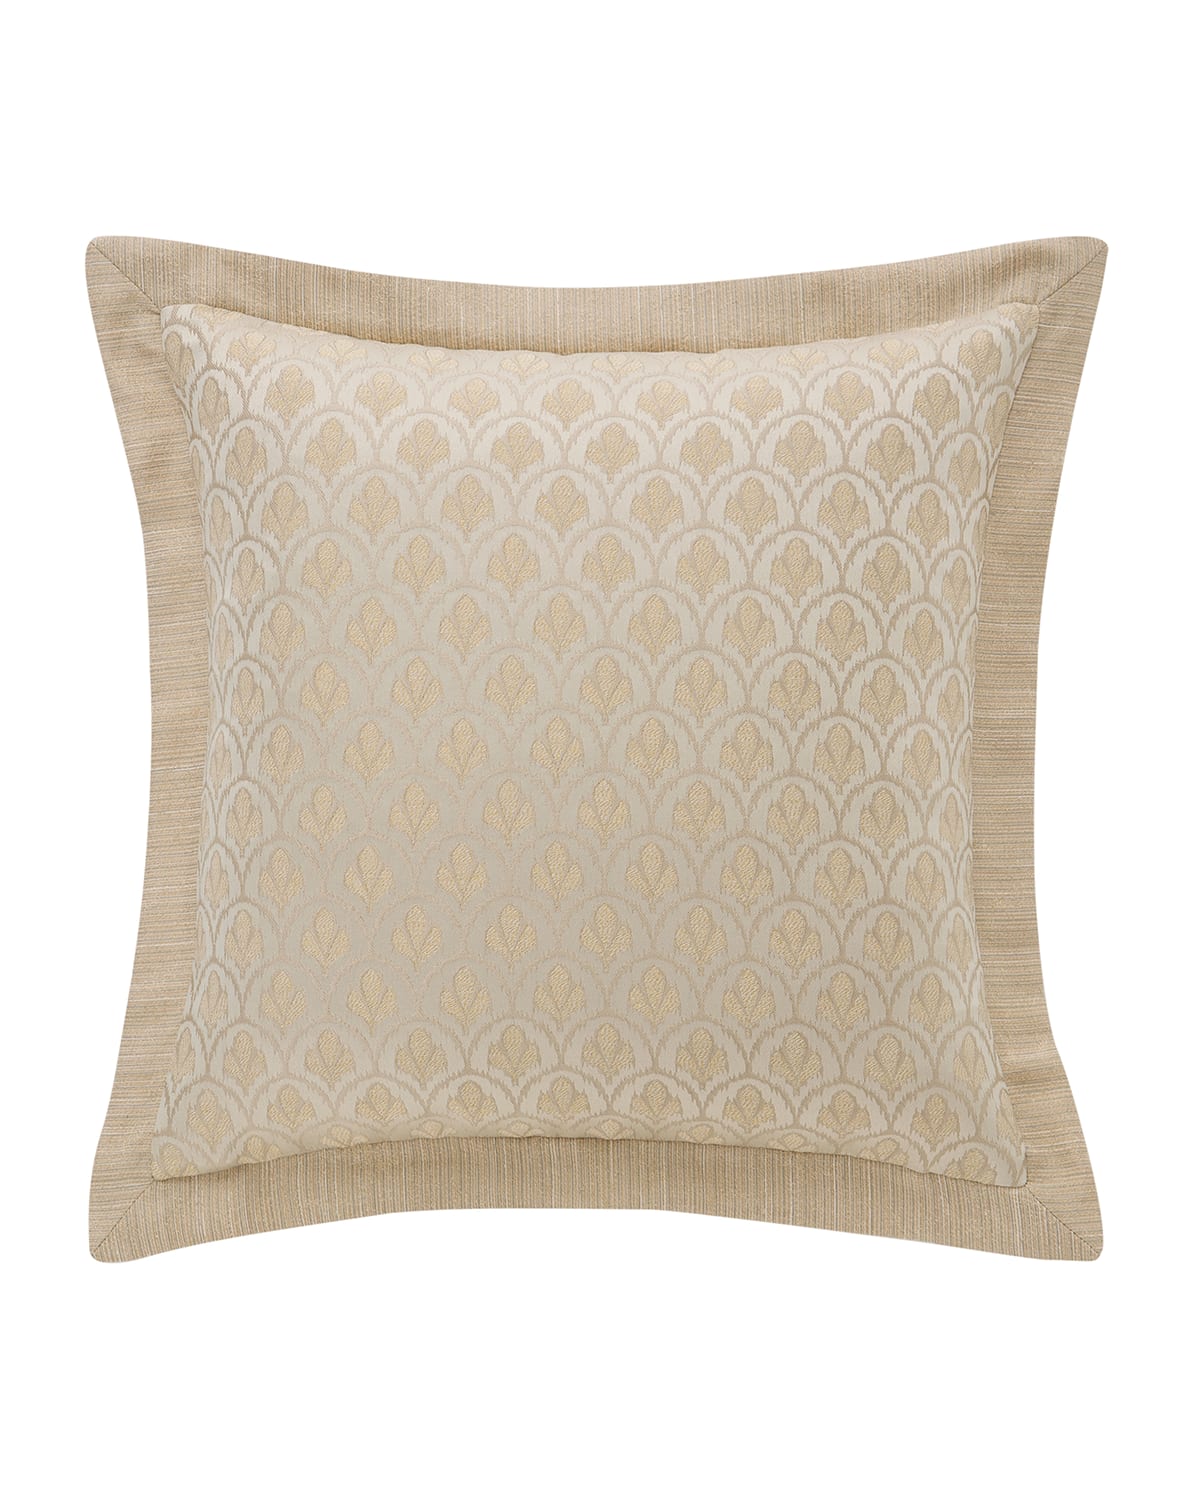 Image Waterford Abrielle Square Pillow